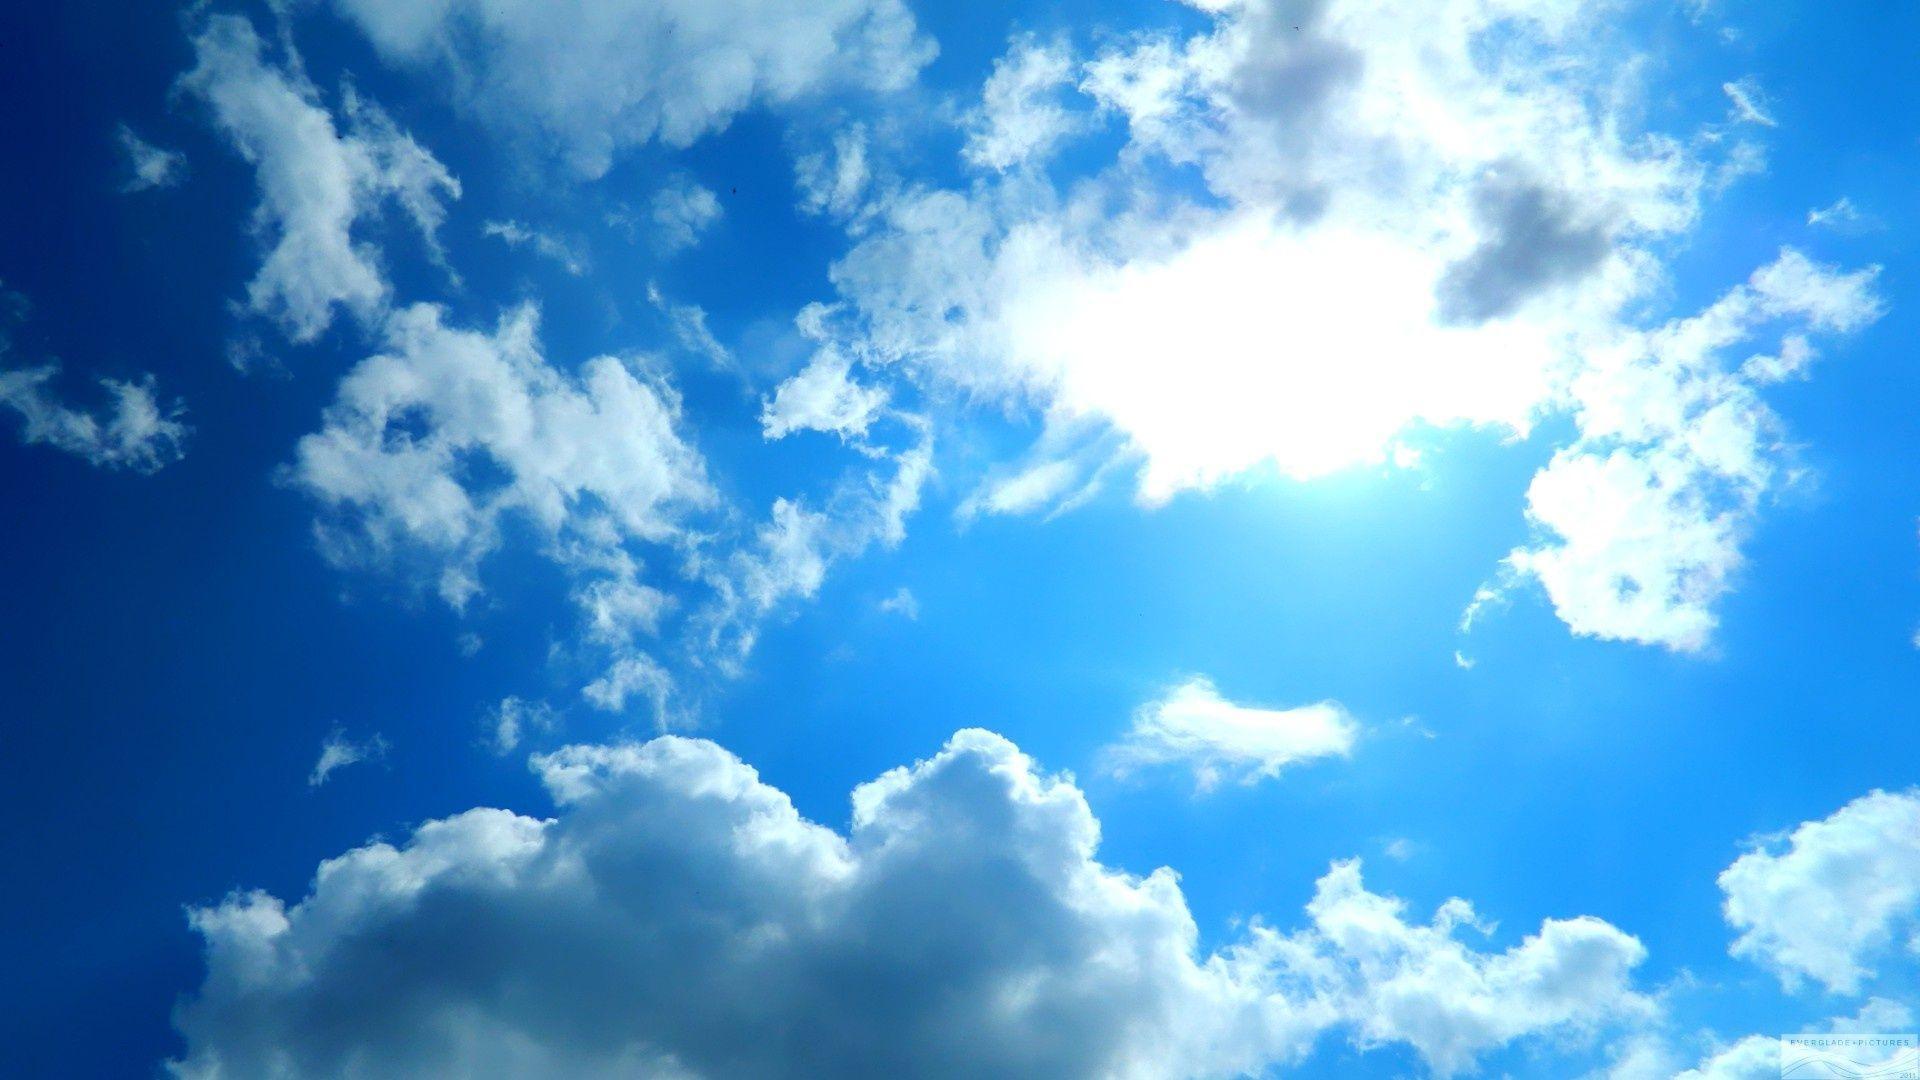 Blue Sky Photos, Download The BEST Free Blue Sky Stock Photos & HD Images